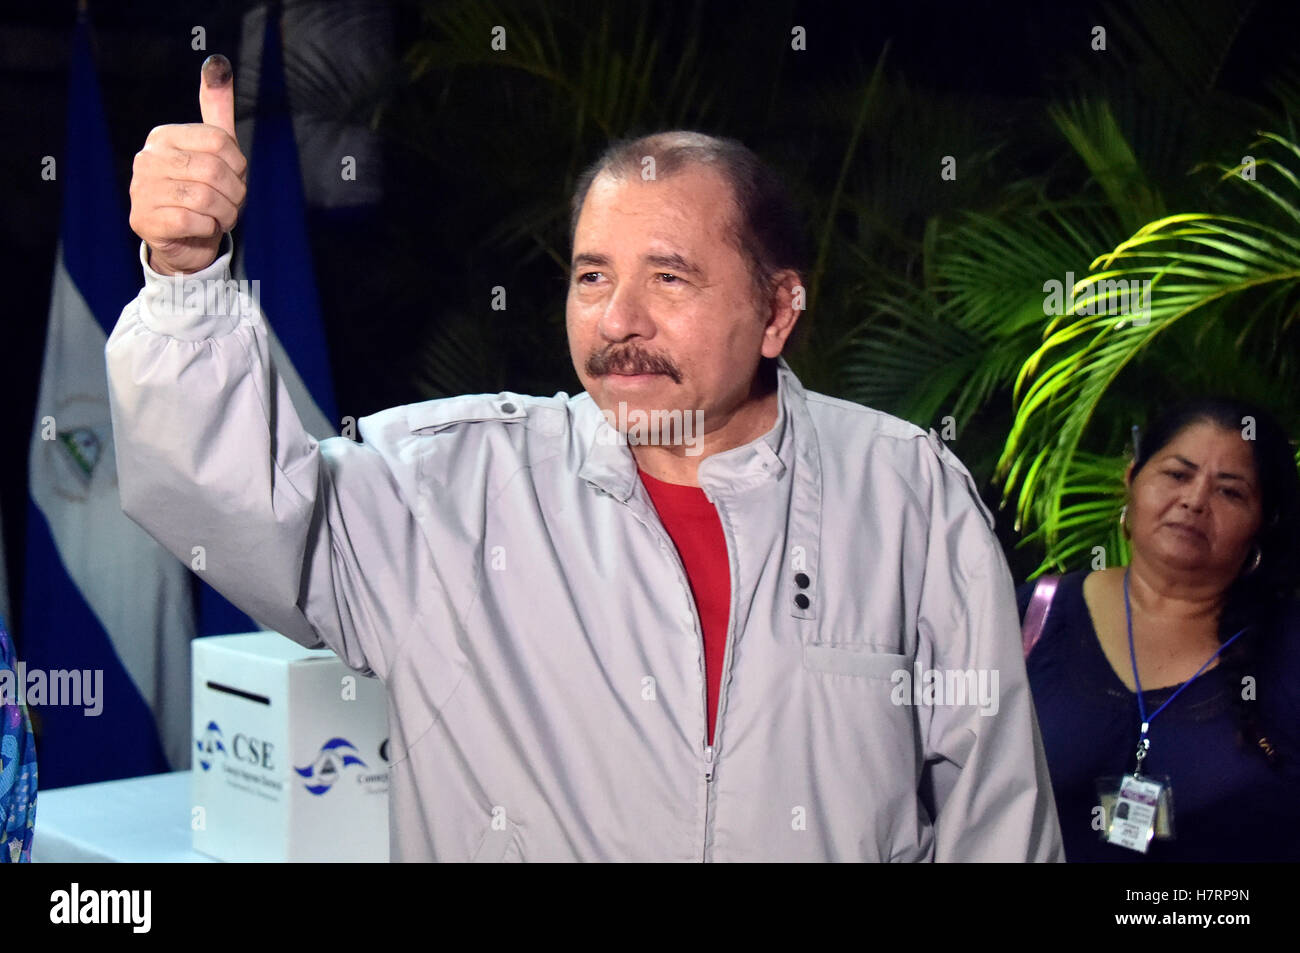 Managua, Nicaragua. 6th Nov, 2016. Nicaraguan President Daniel Ortega shows his inked thumb after casting his ballot in Managua, capital of Nicaragua, on Nov. 6, 2016. Nicaraguan President Daniel Ortega has won the presidential elections, confirmed the Supreme Electoral Council (CSE) on Monday. © Pool/Xinhua/Alamy Live News Stock Photo